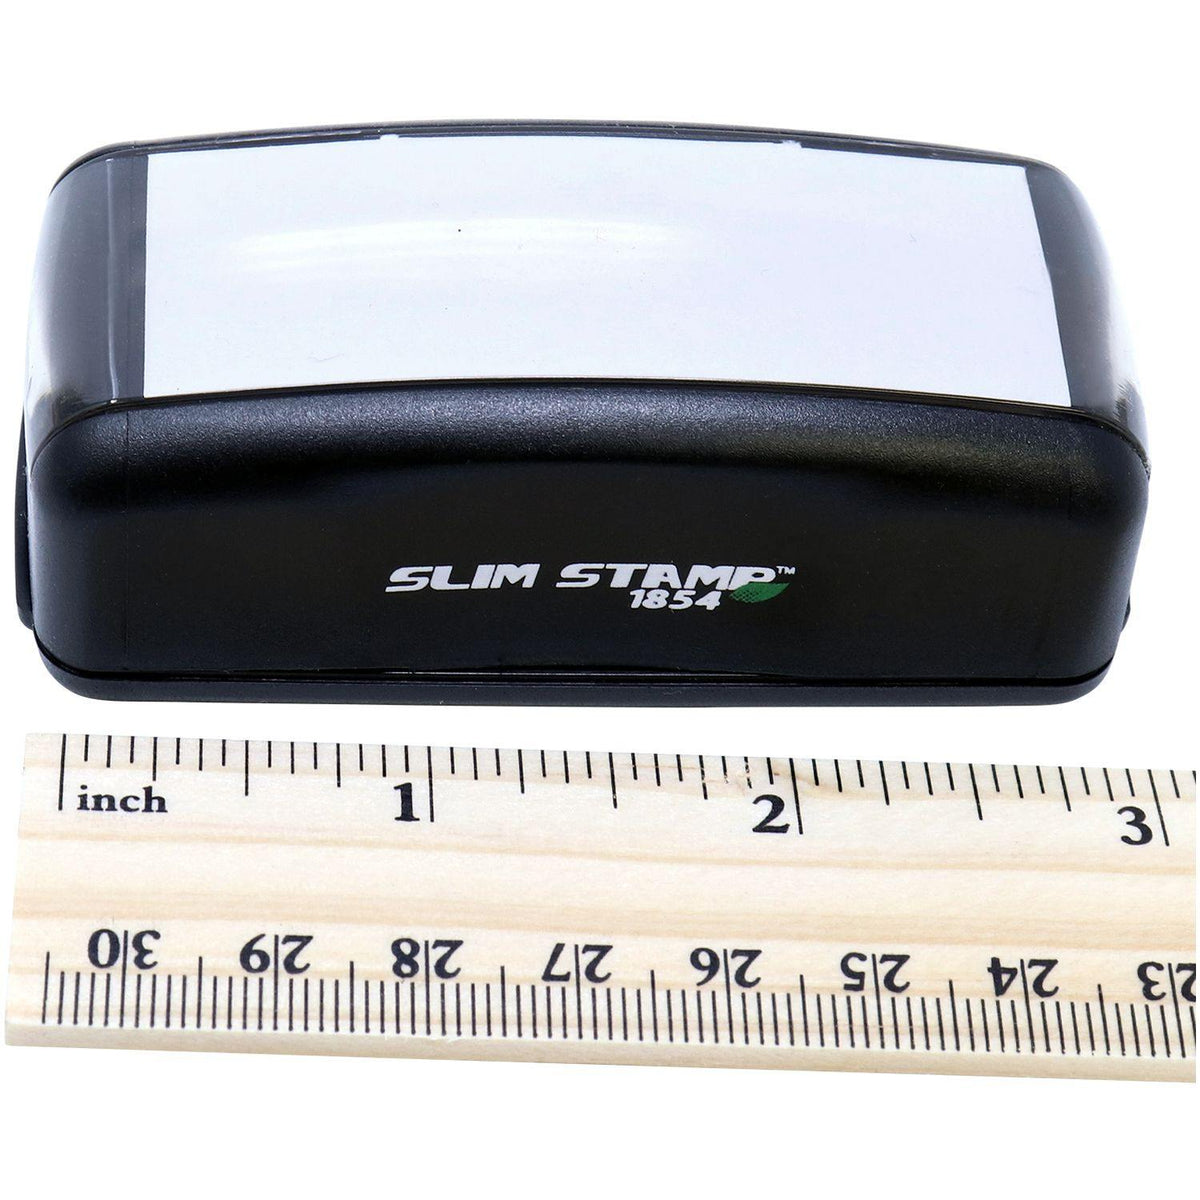 Measurement Large Pre-Inked Skinny To the Parents of Stamp with Ruler